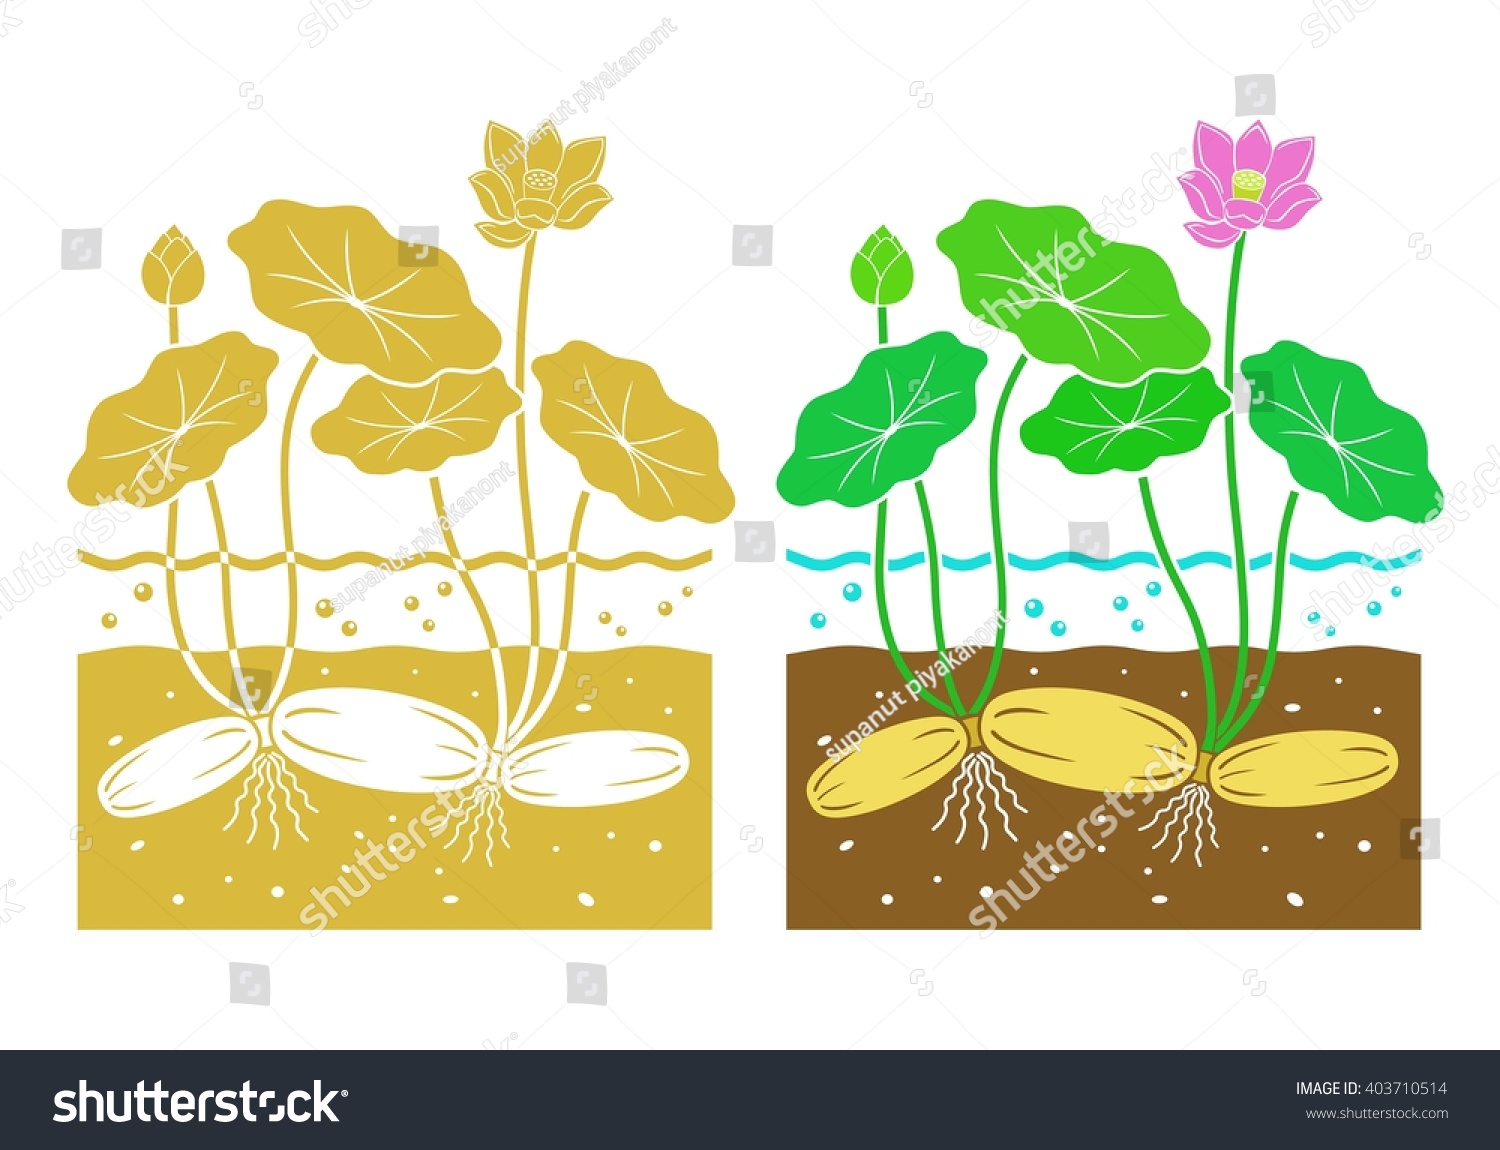 flower with roots clipart - photo #34